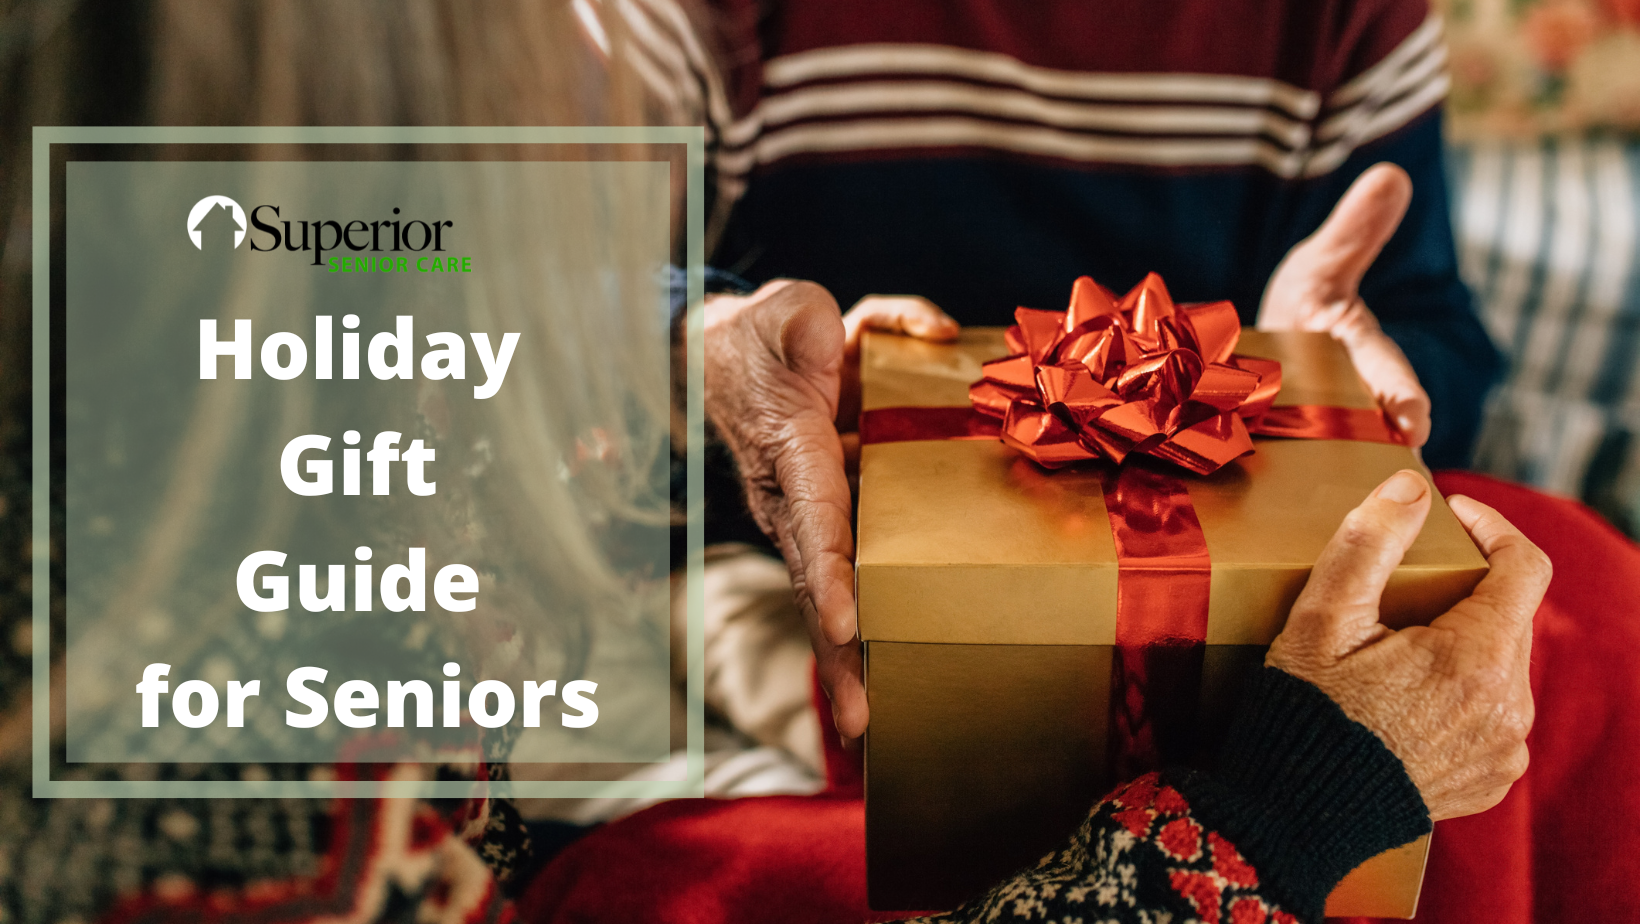 5 Affordable Gifts for Seniors to Make This Christmas Amazing for Them